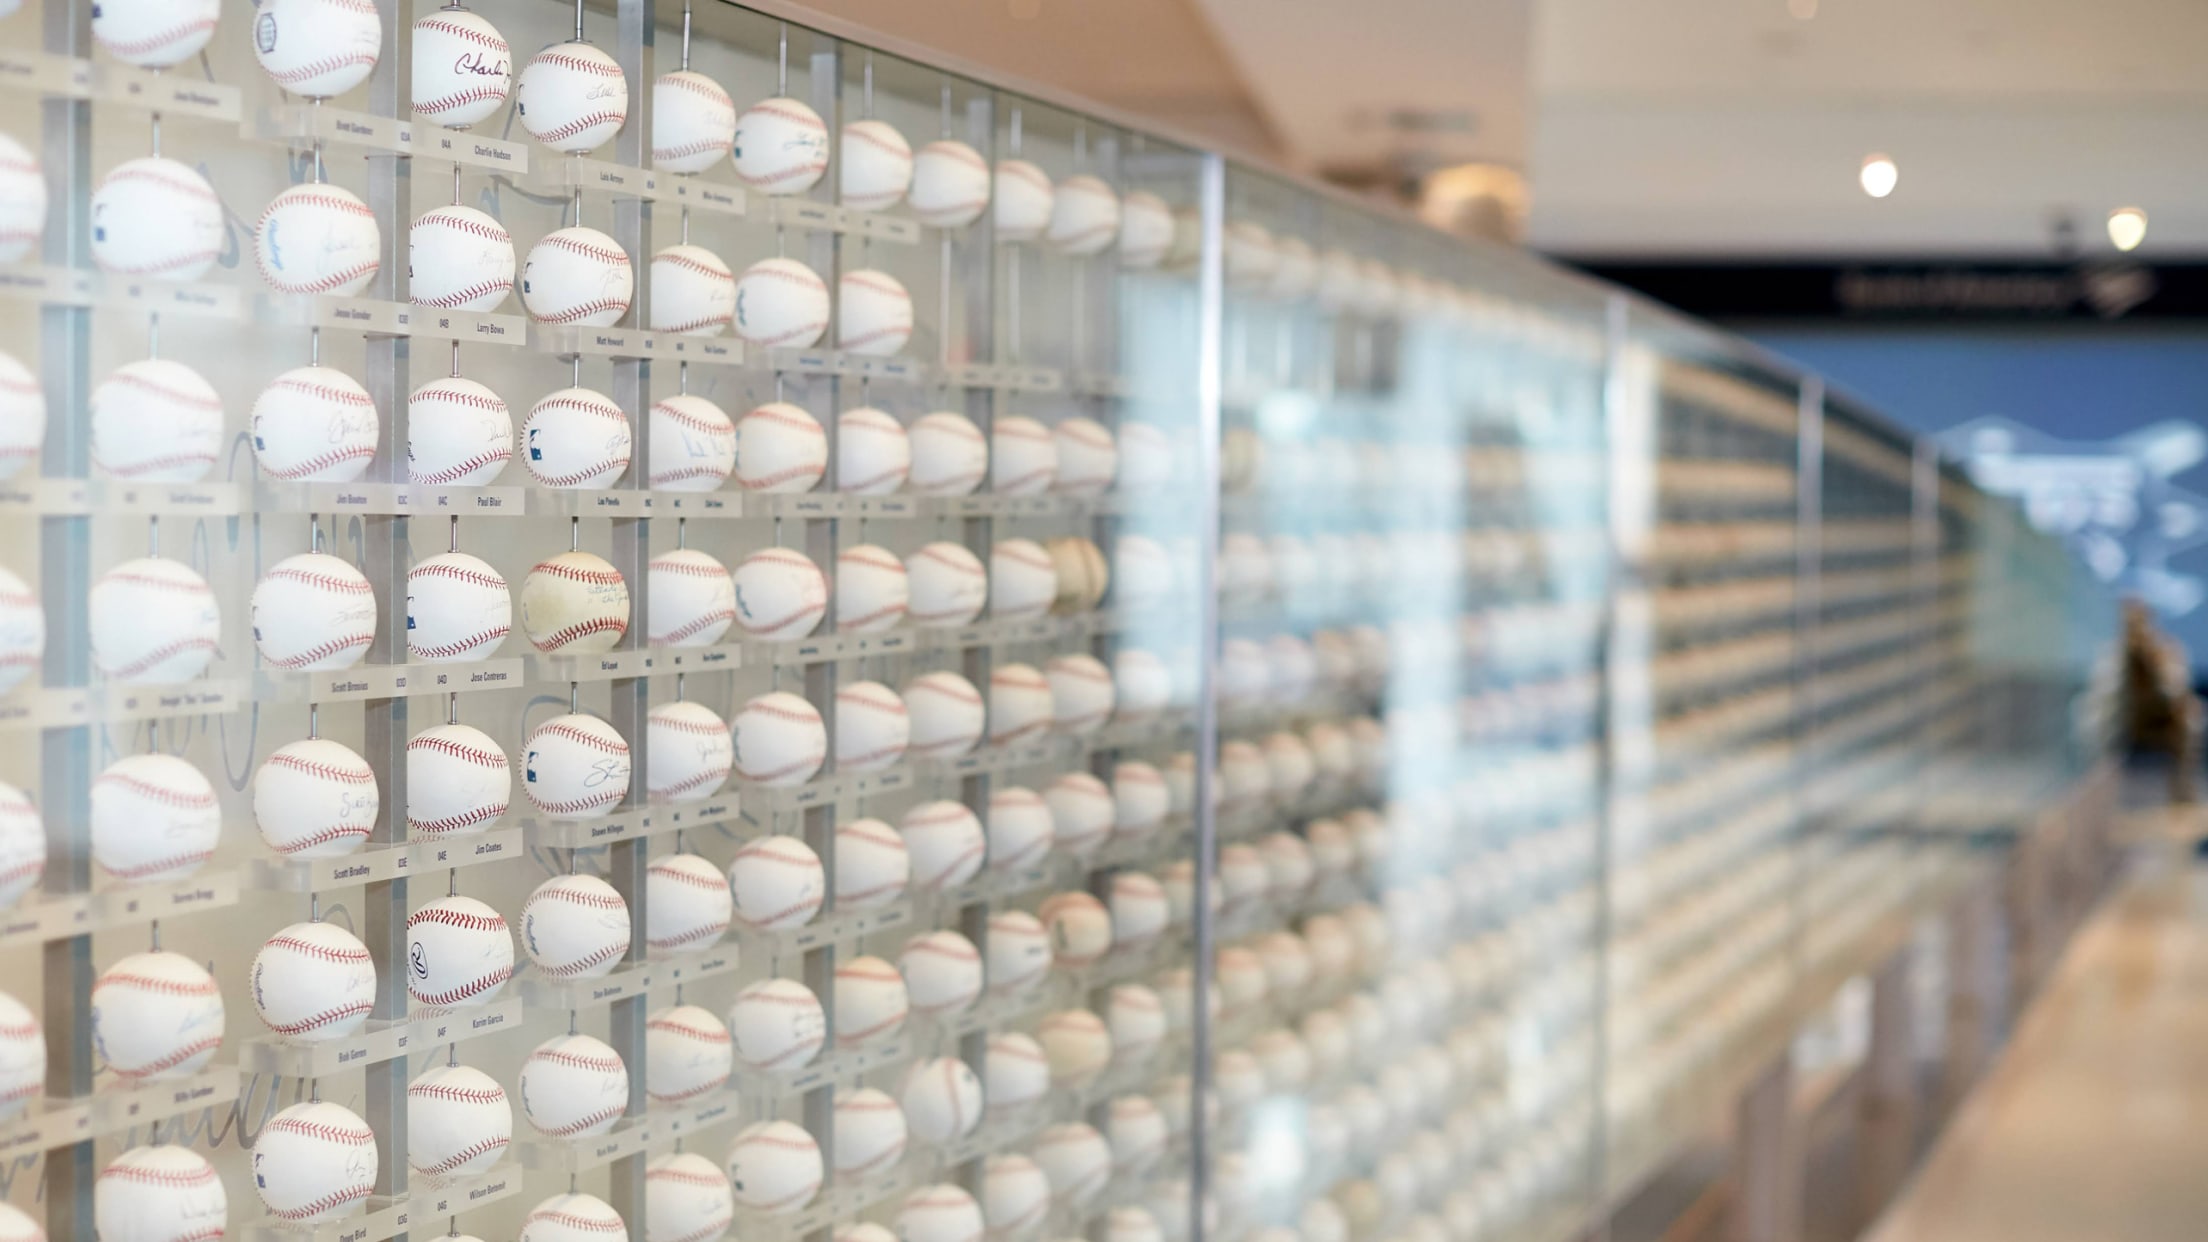 New York Yankees Museum presented by Bank of America - Featured